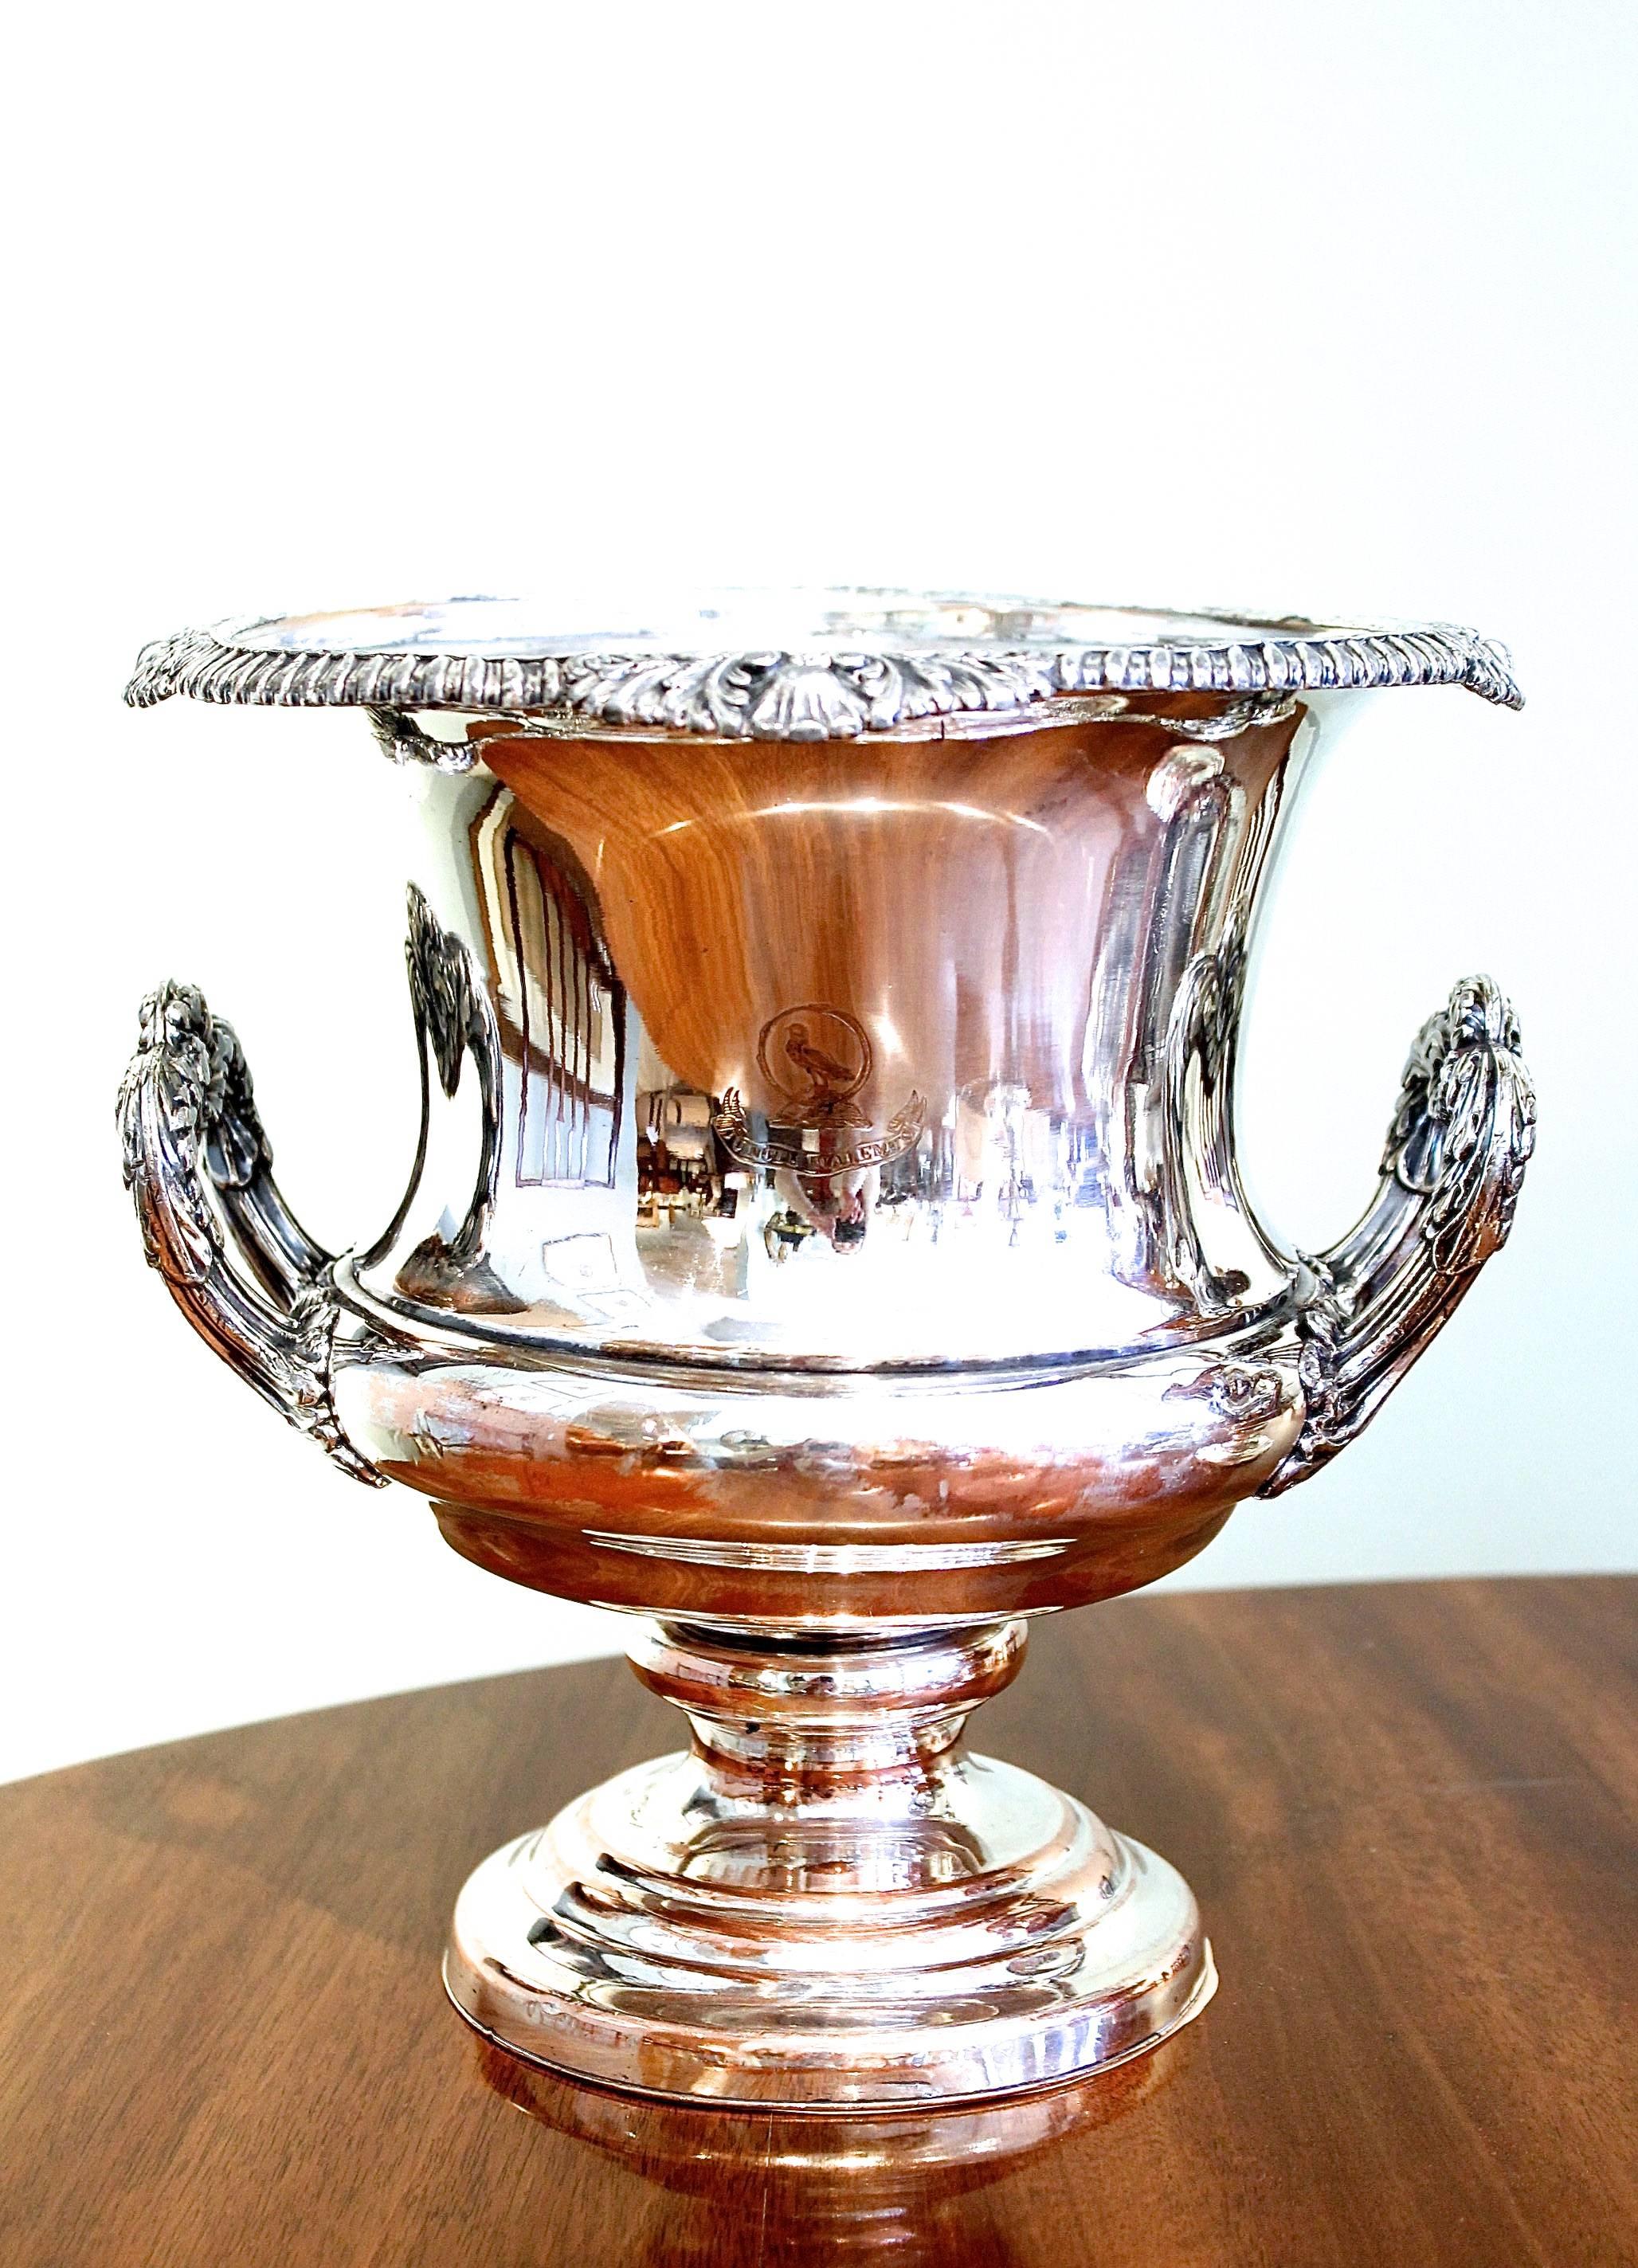 A pair of 19th century English Champagne buckets with armorial engraving on both sides, one side with a boar’s head and “Semper Fidem” “(always faithful”) and the other side bearing an engraved bird along with the Walker family motto “Juncti